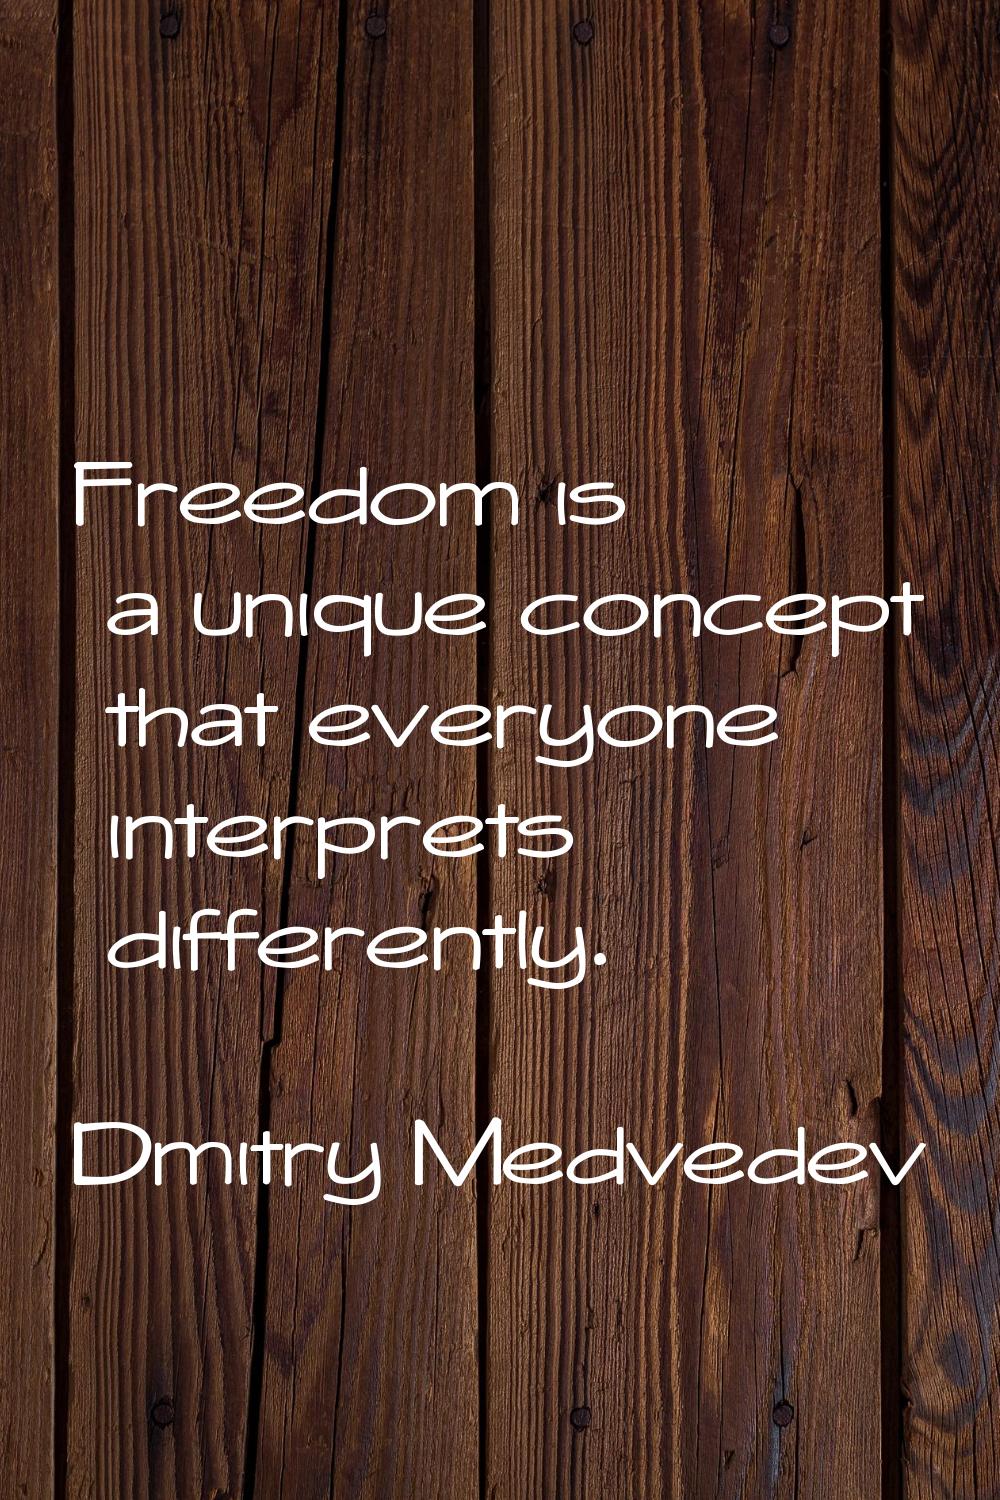 Freedom is a unique concept that everyone interprets differently.